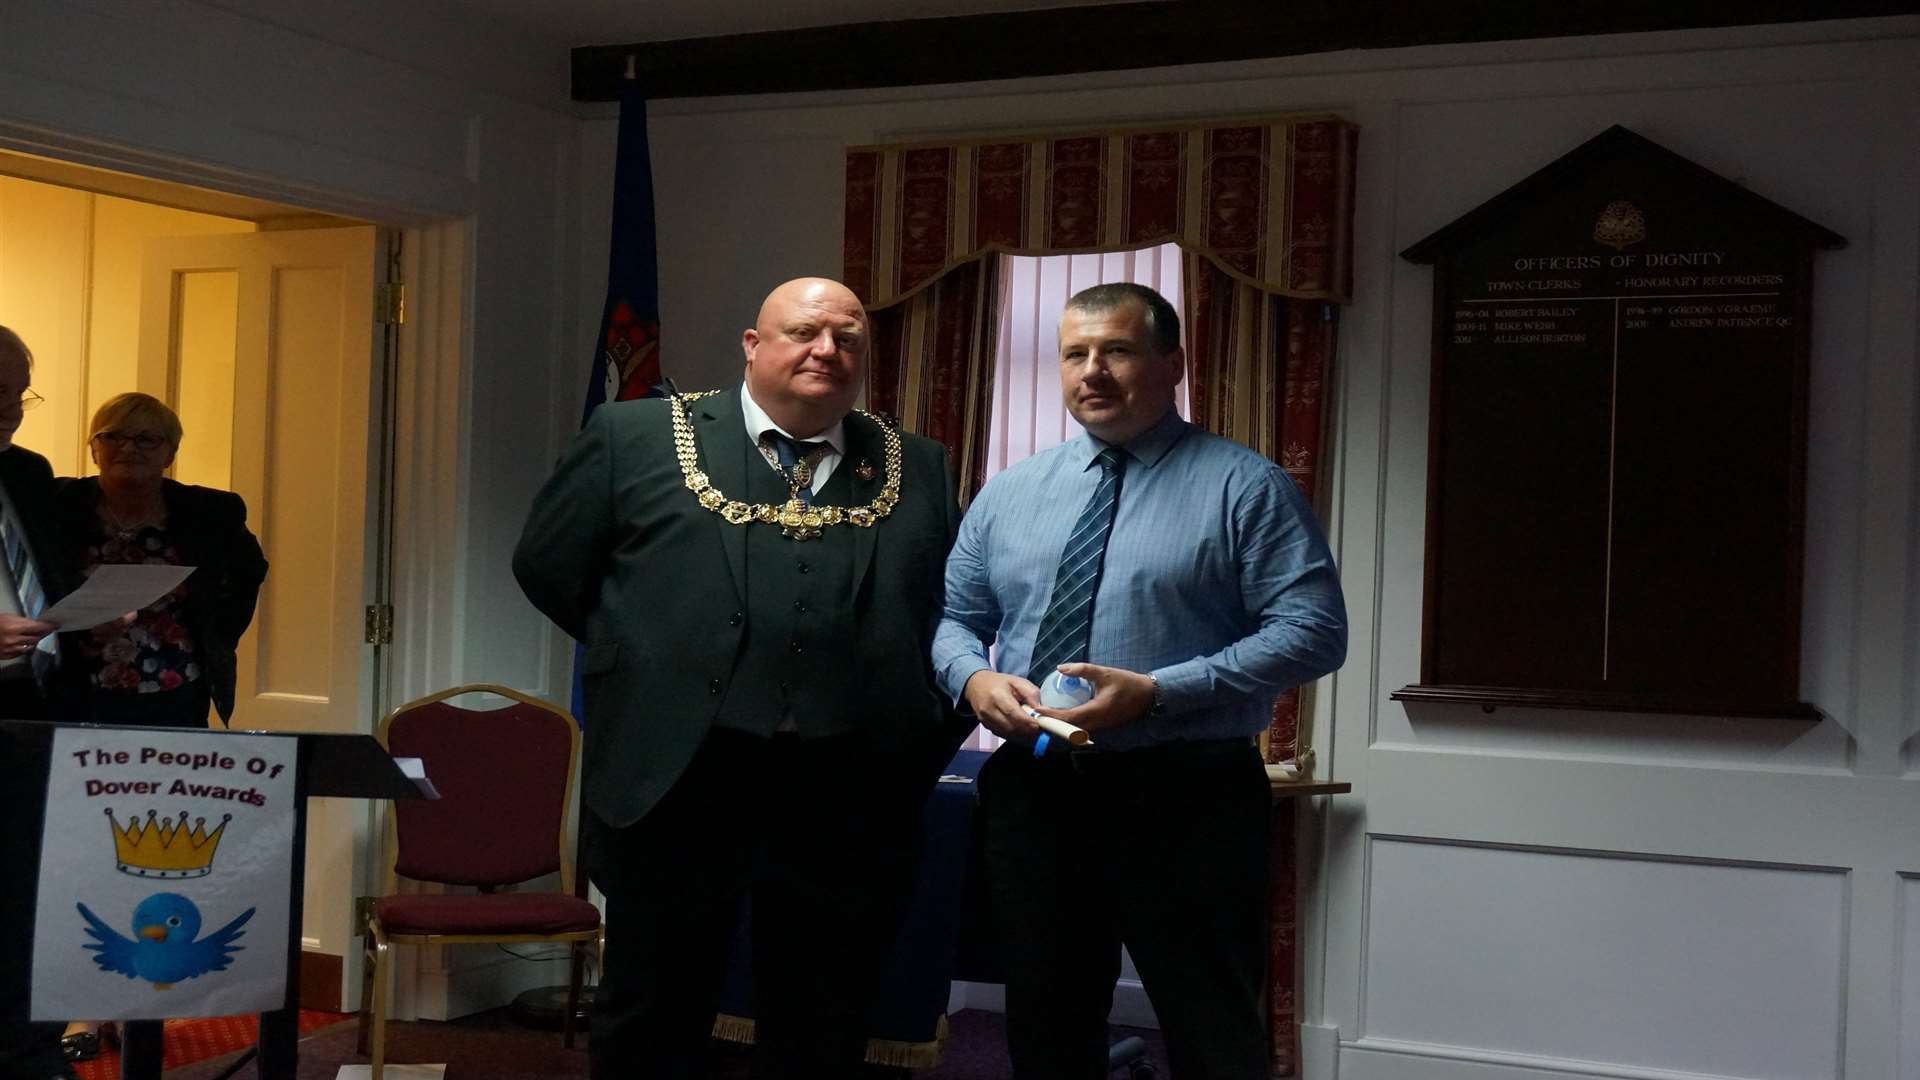 The mayor of Dover Cllr Neil Rix presents an award to Michael Orchard of the Western Heights Preservation Society